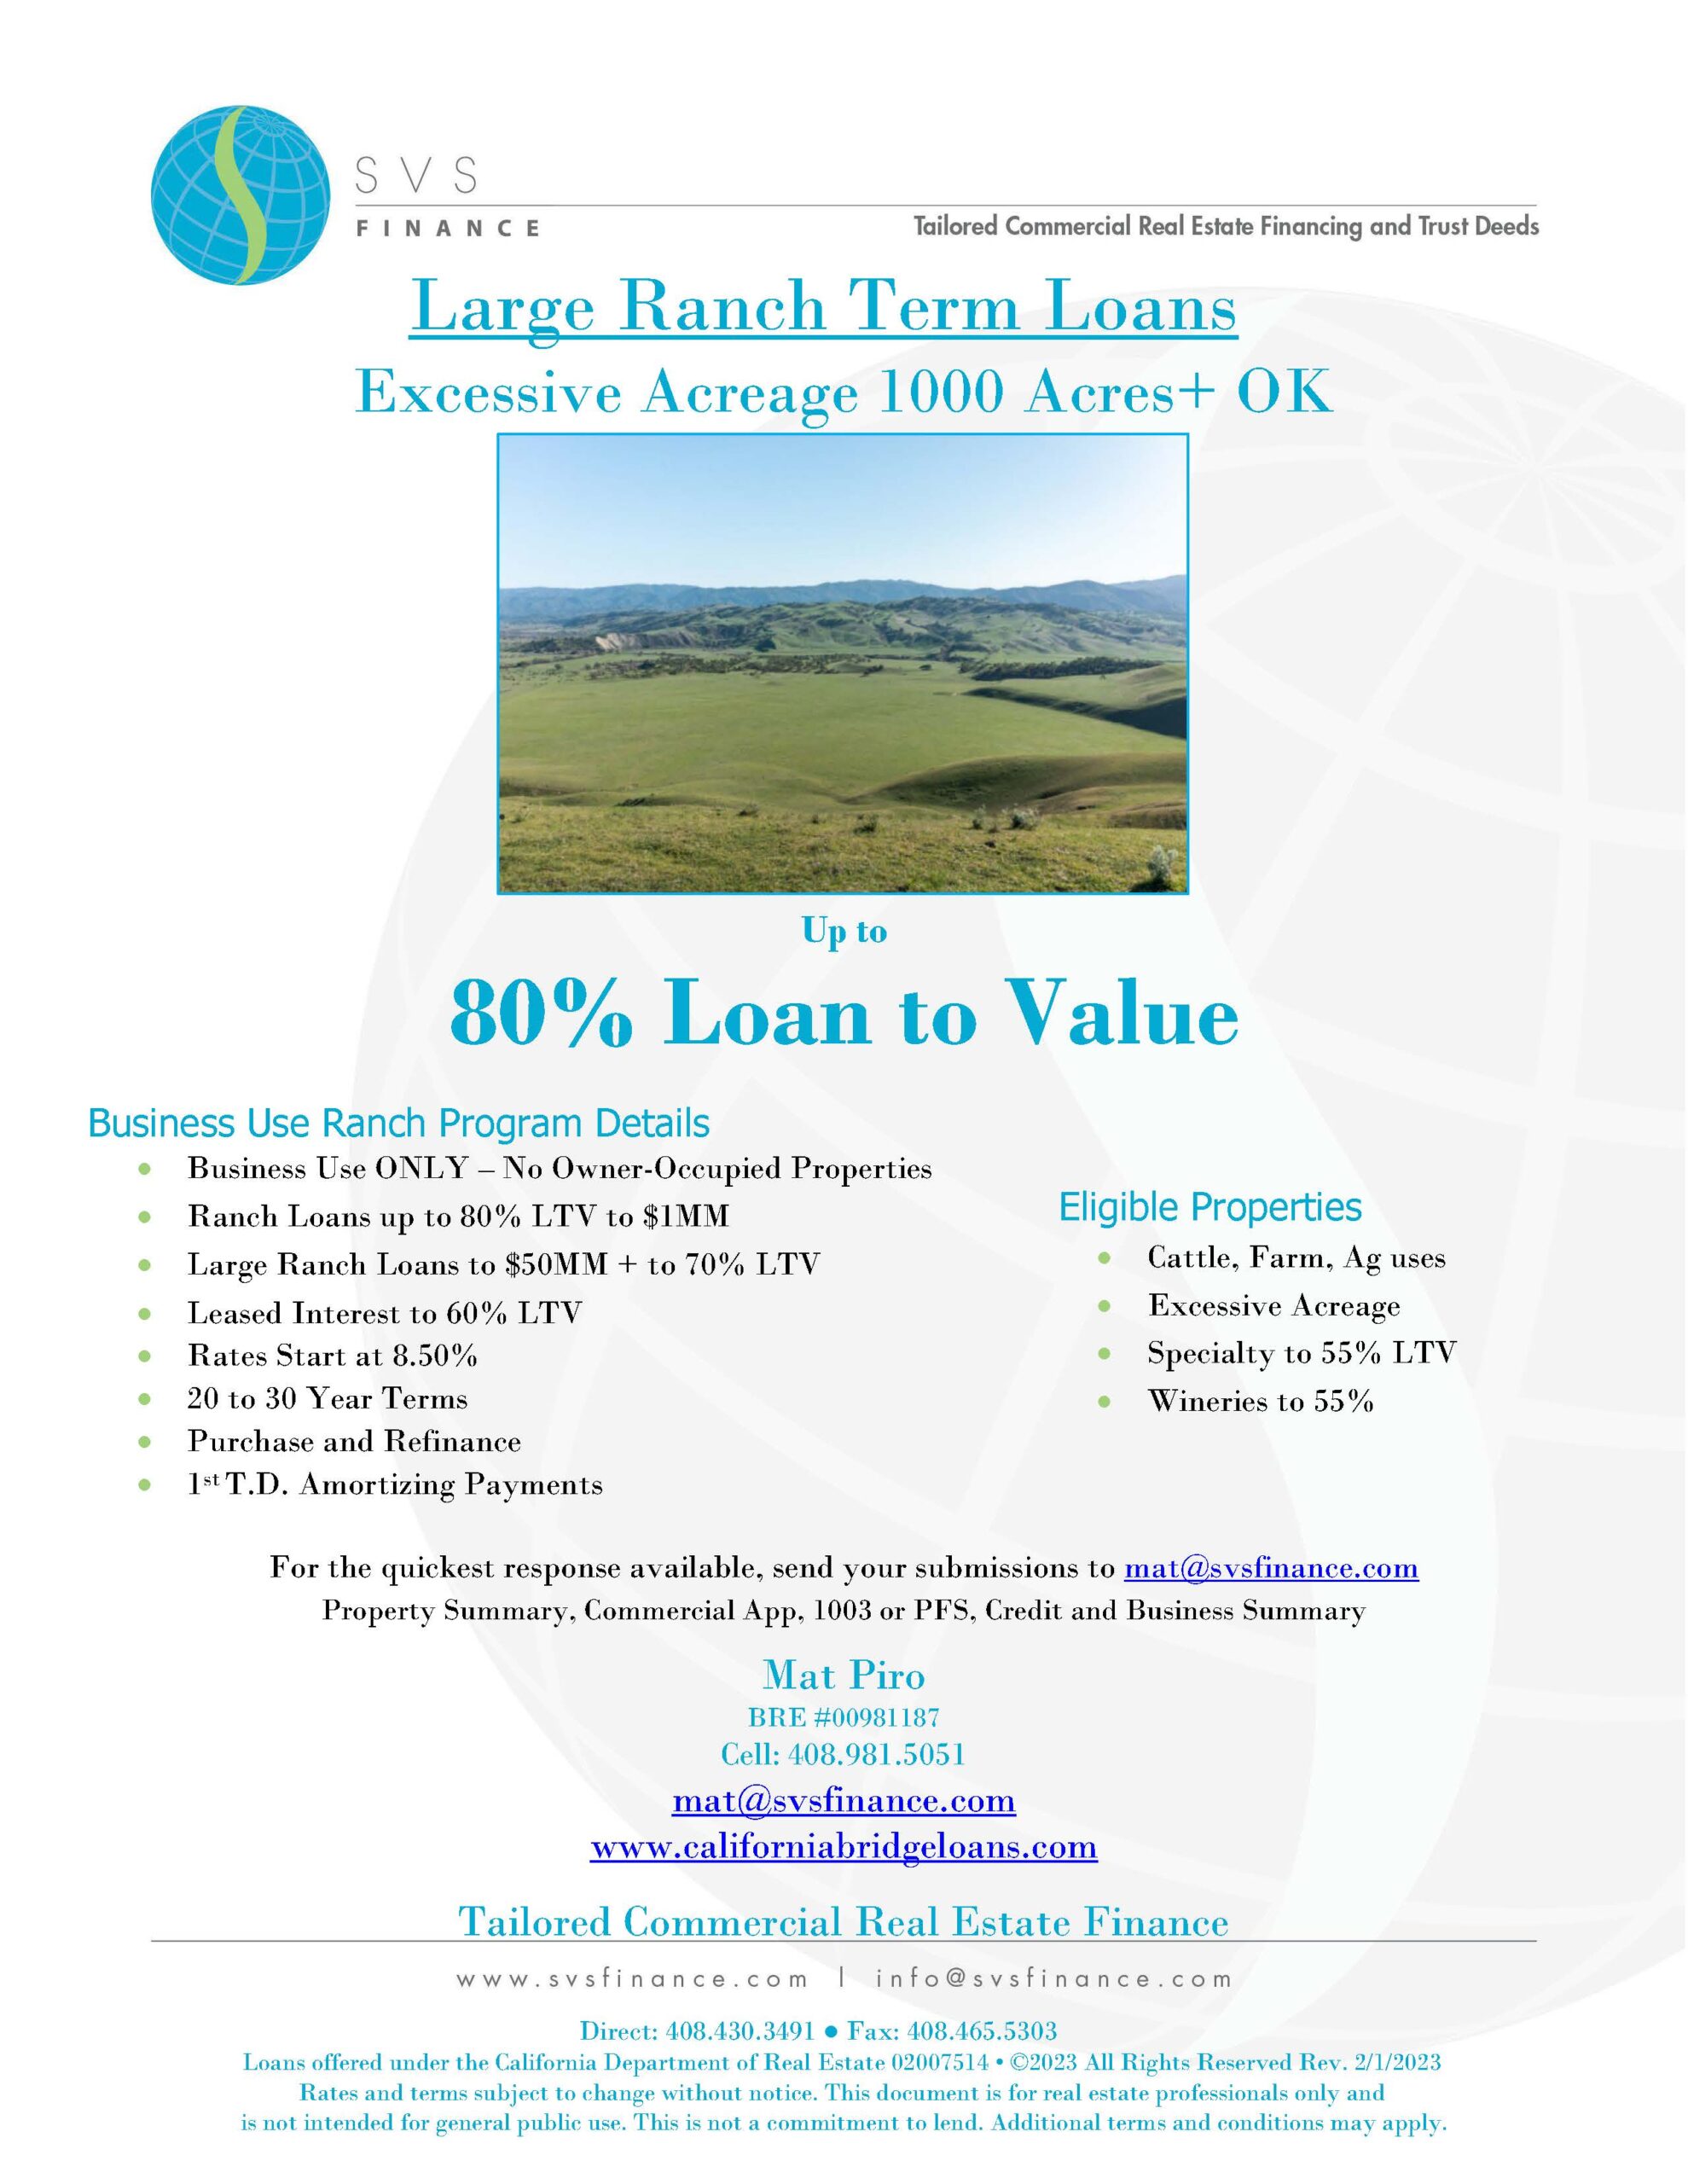 Ranch and Ag Land Loans and Mortgages. From 40 acres to 4000 acres, we can provide Capital for working Ag Properties with Business Use. Capital can be used for purchase or refinance on Non-Owner Occupied Ranch Properties. Fixed Rate loans with Terms up to 30 Years.